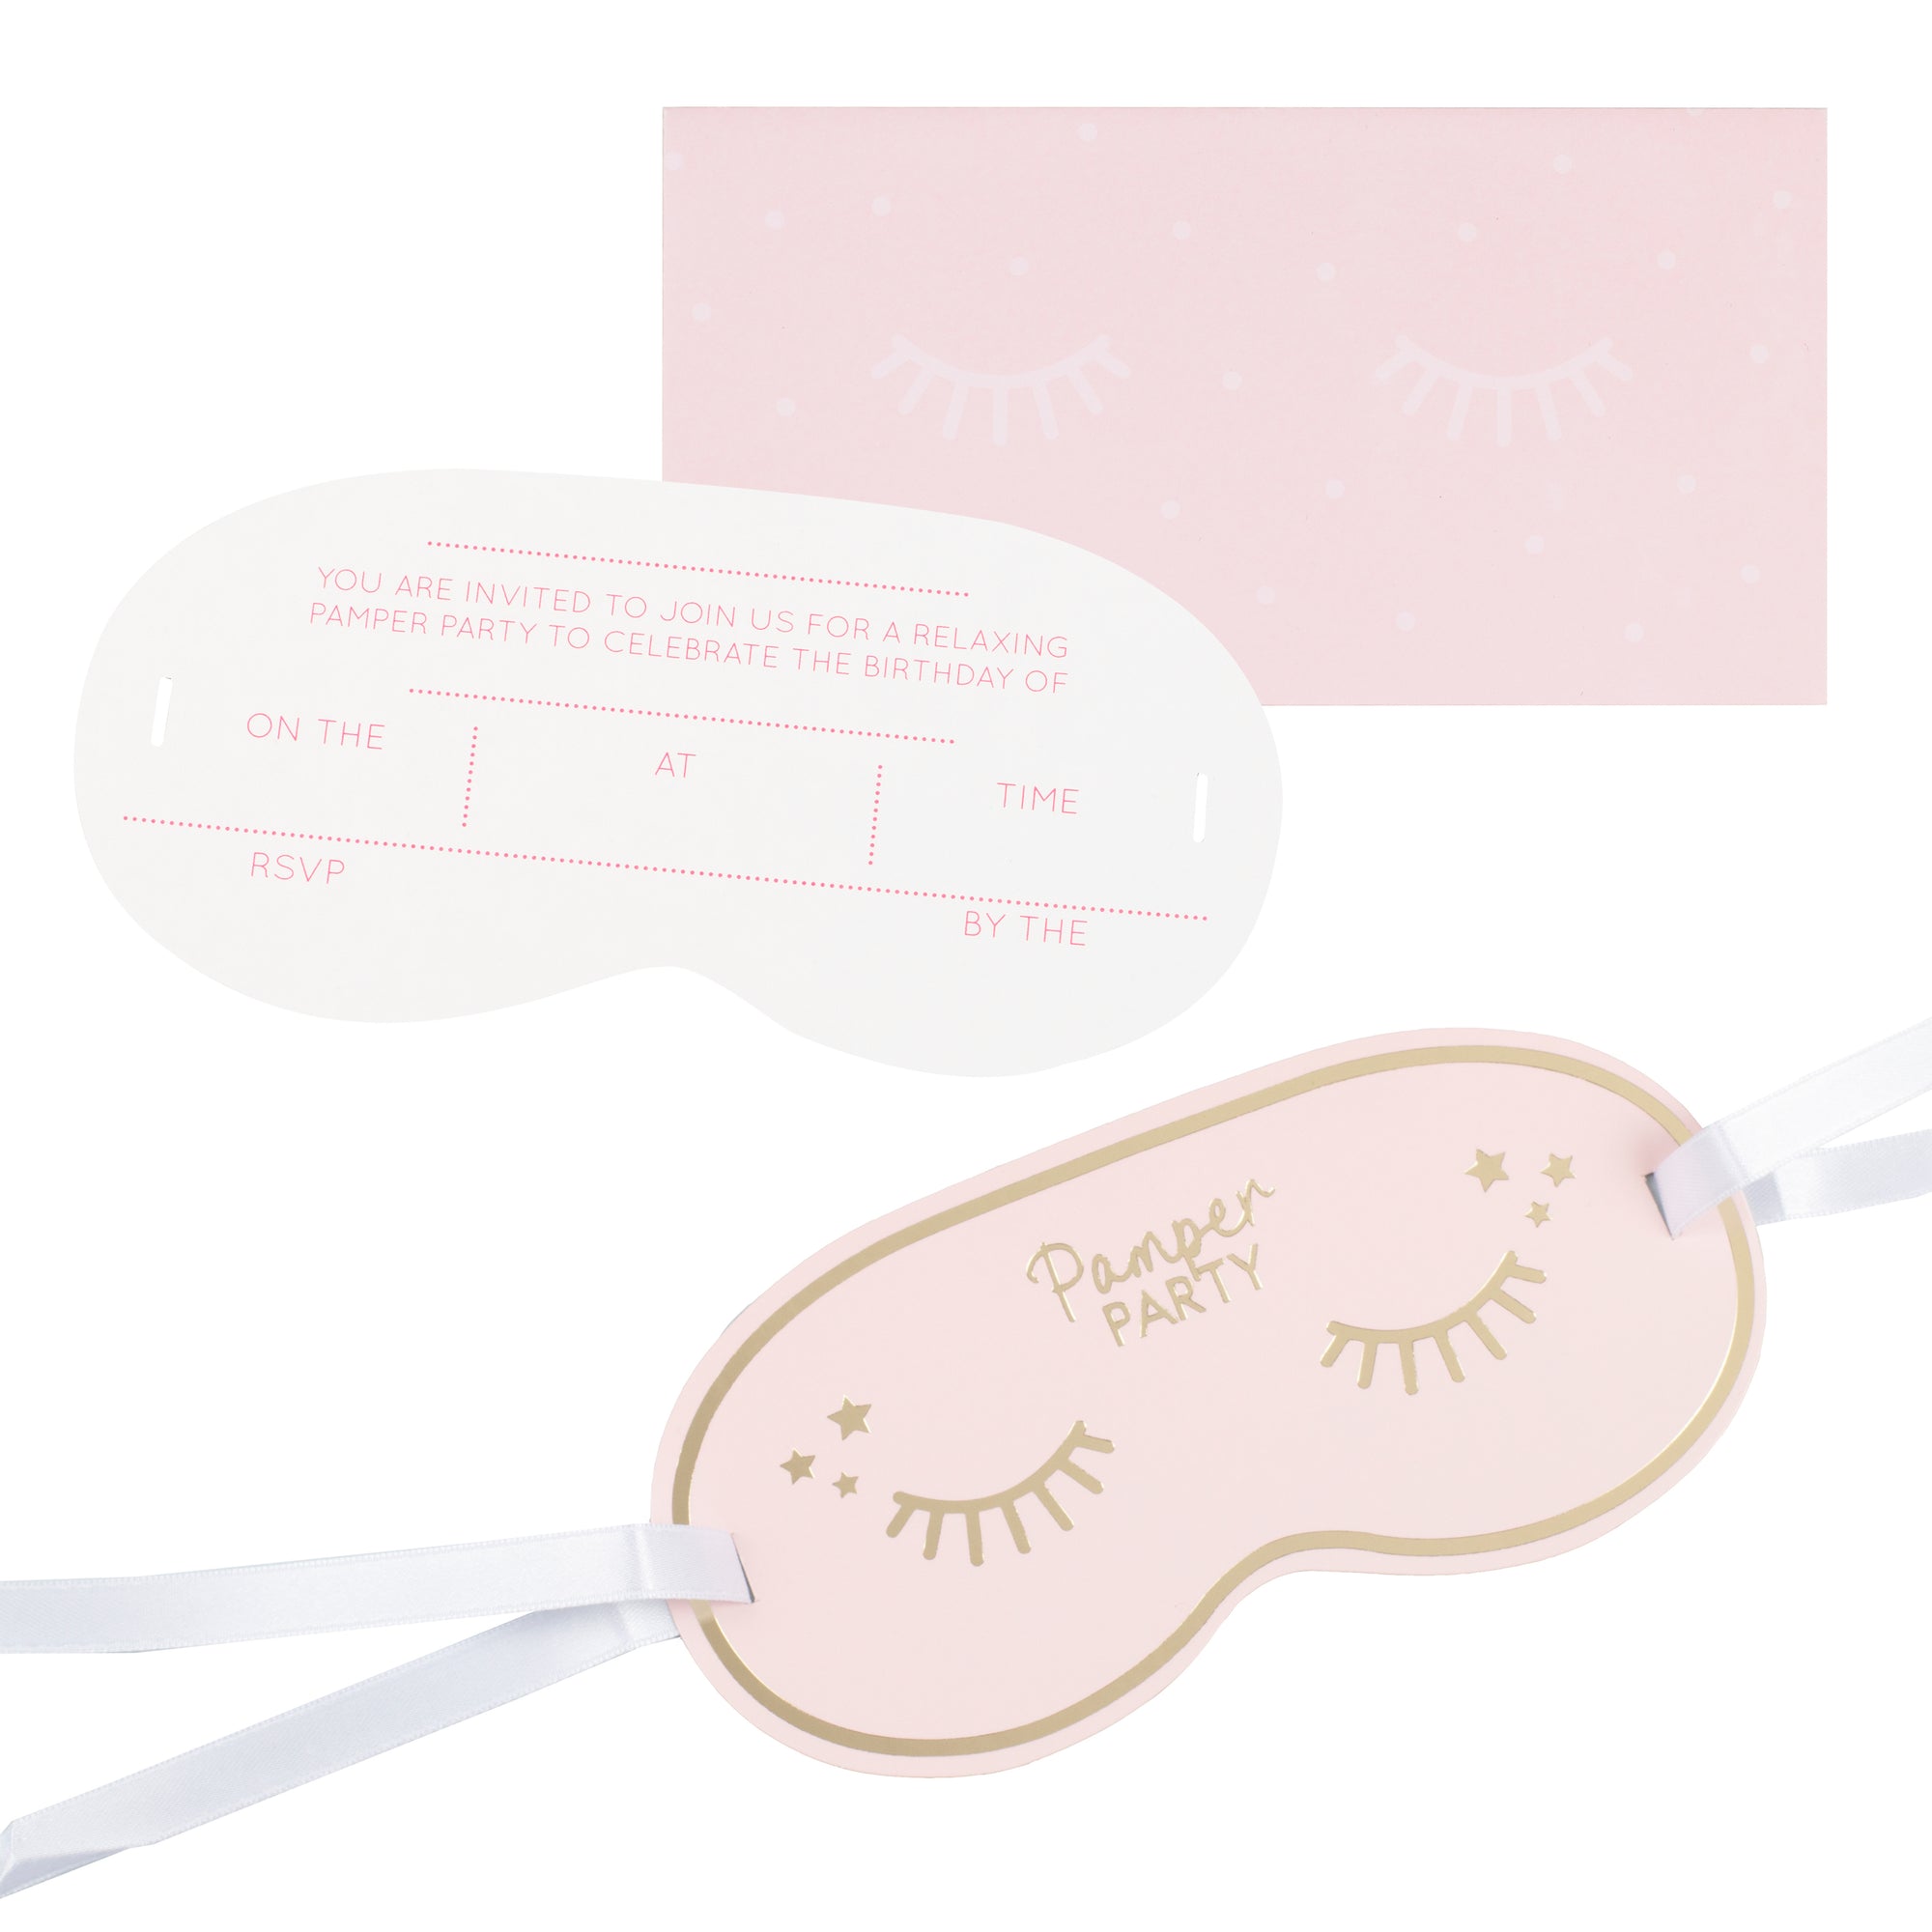 Pink pamper party with gold eyelash design invitations 